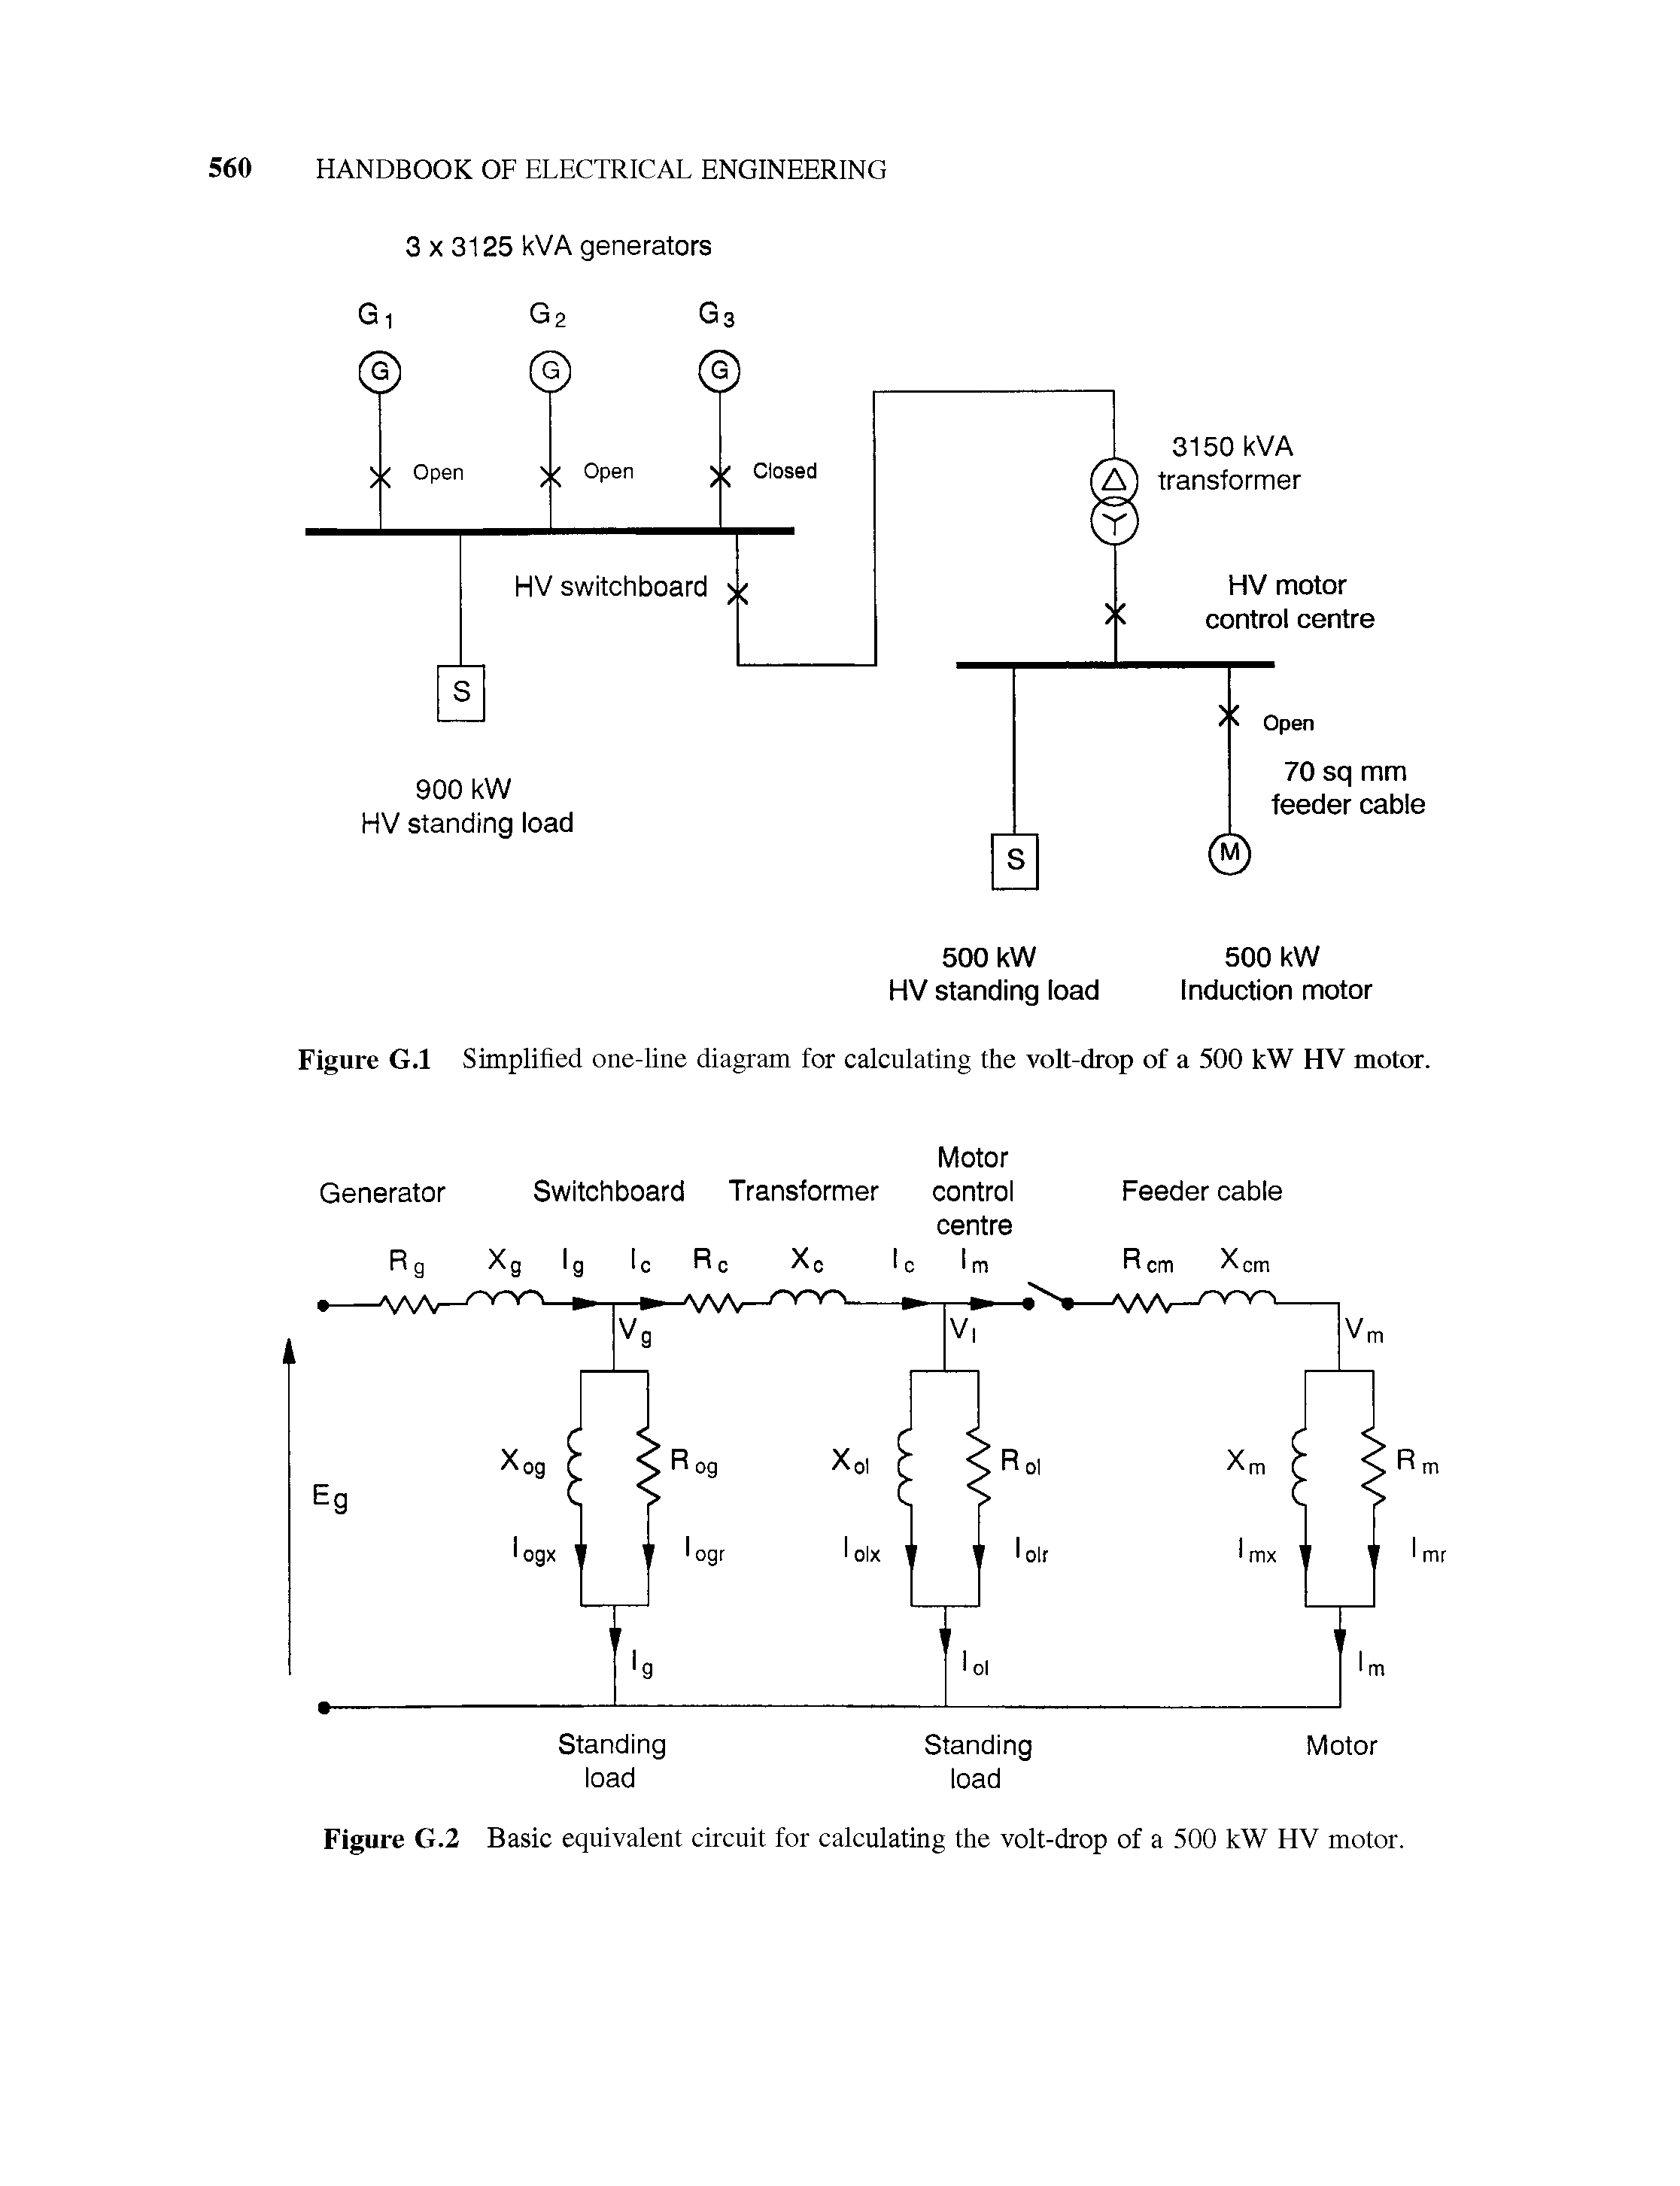 Figure G.2 Basic equivalent circuit for calculating the volt-drop of a 500 kW HV motor.